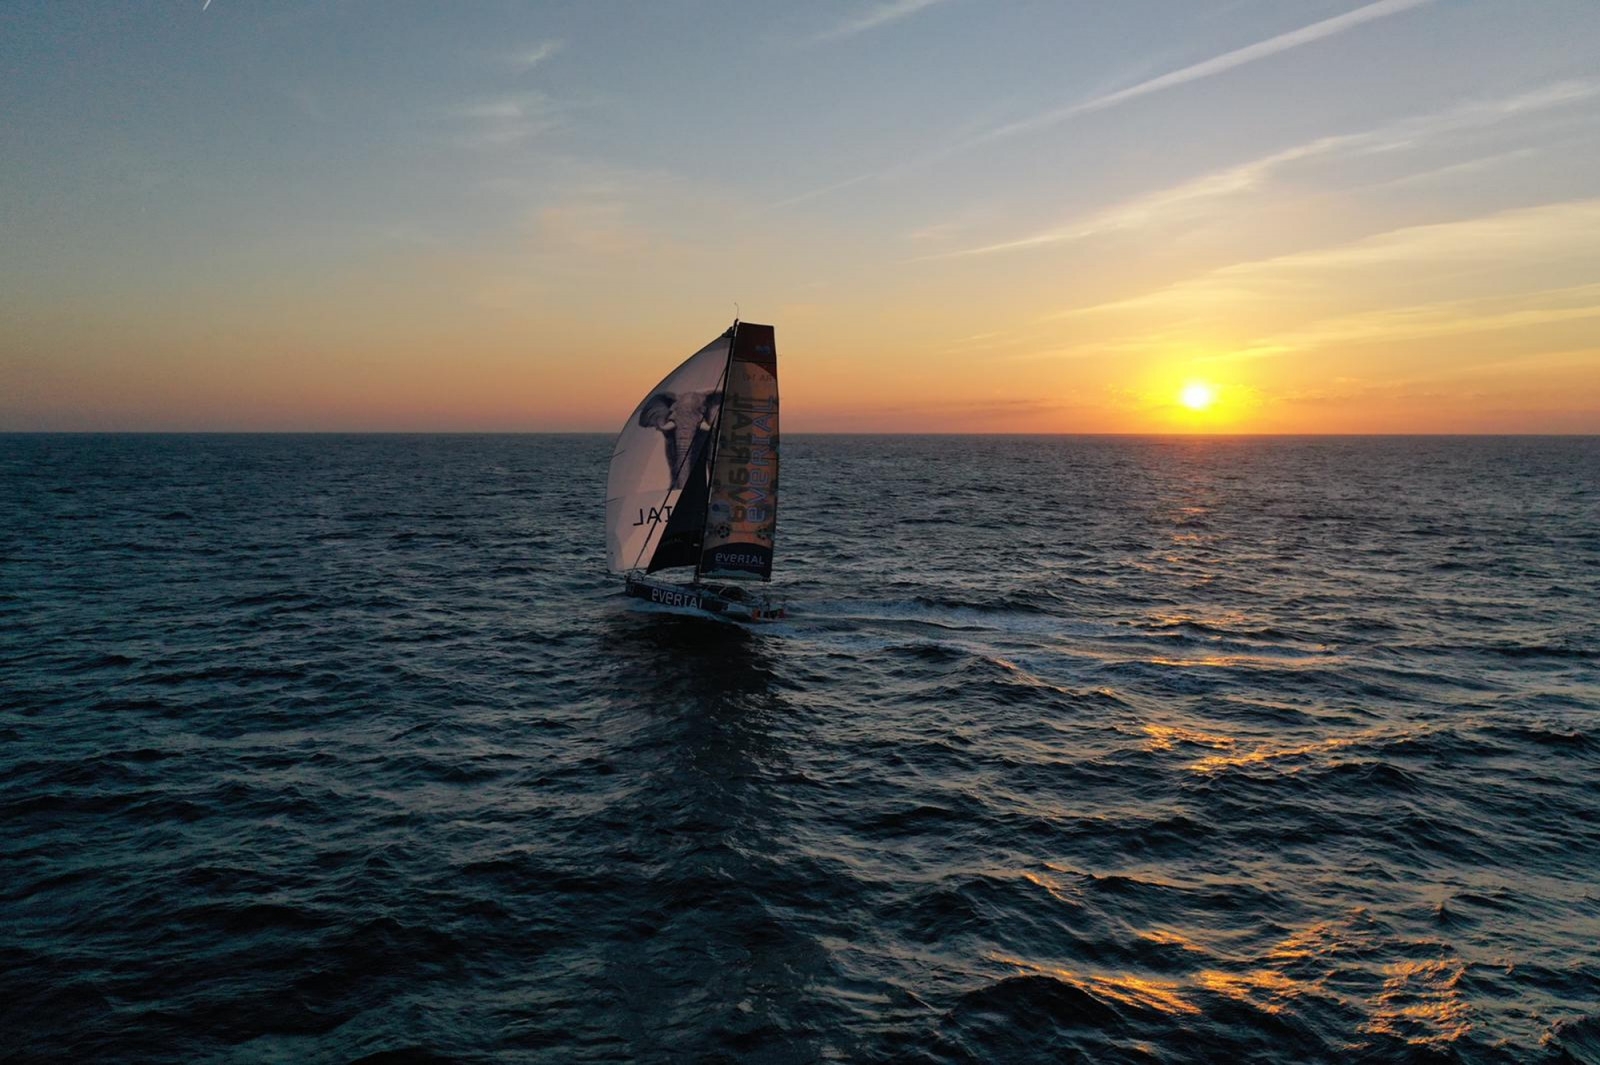  IMOCA Open 60, Class 40, Ultime, Ocean50  Transat Jacques Vabre  Day 14